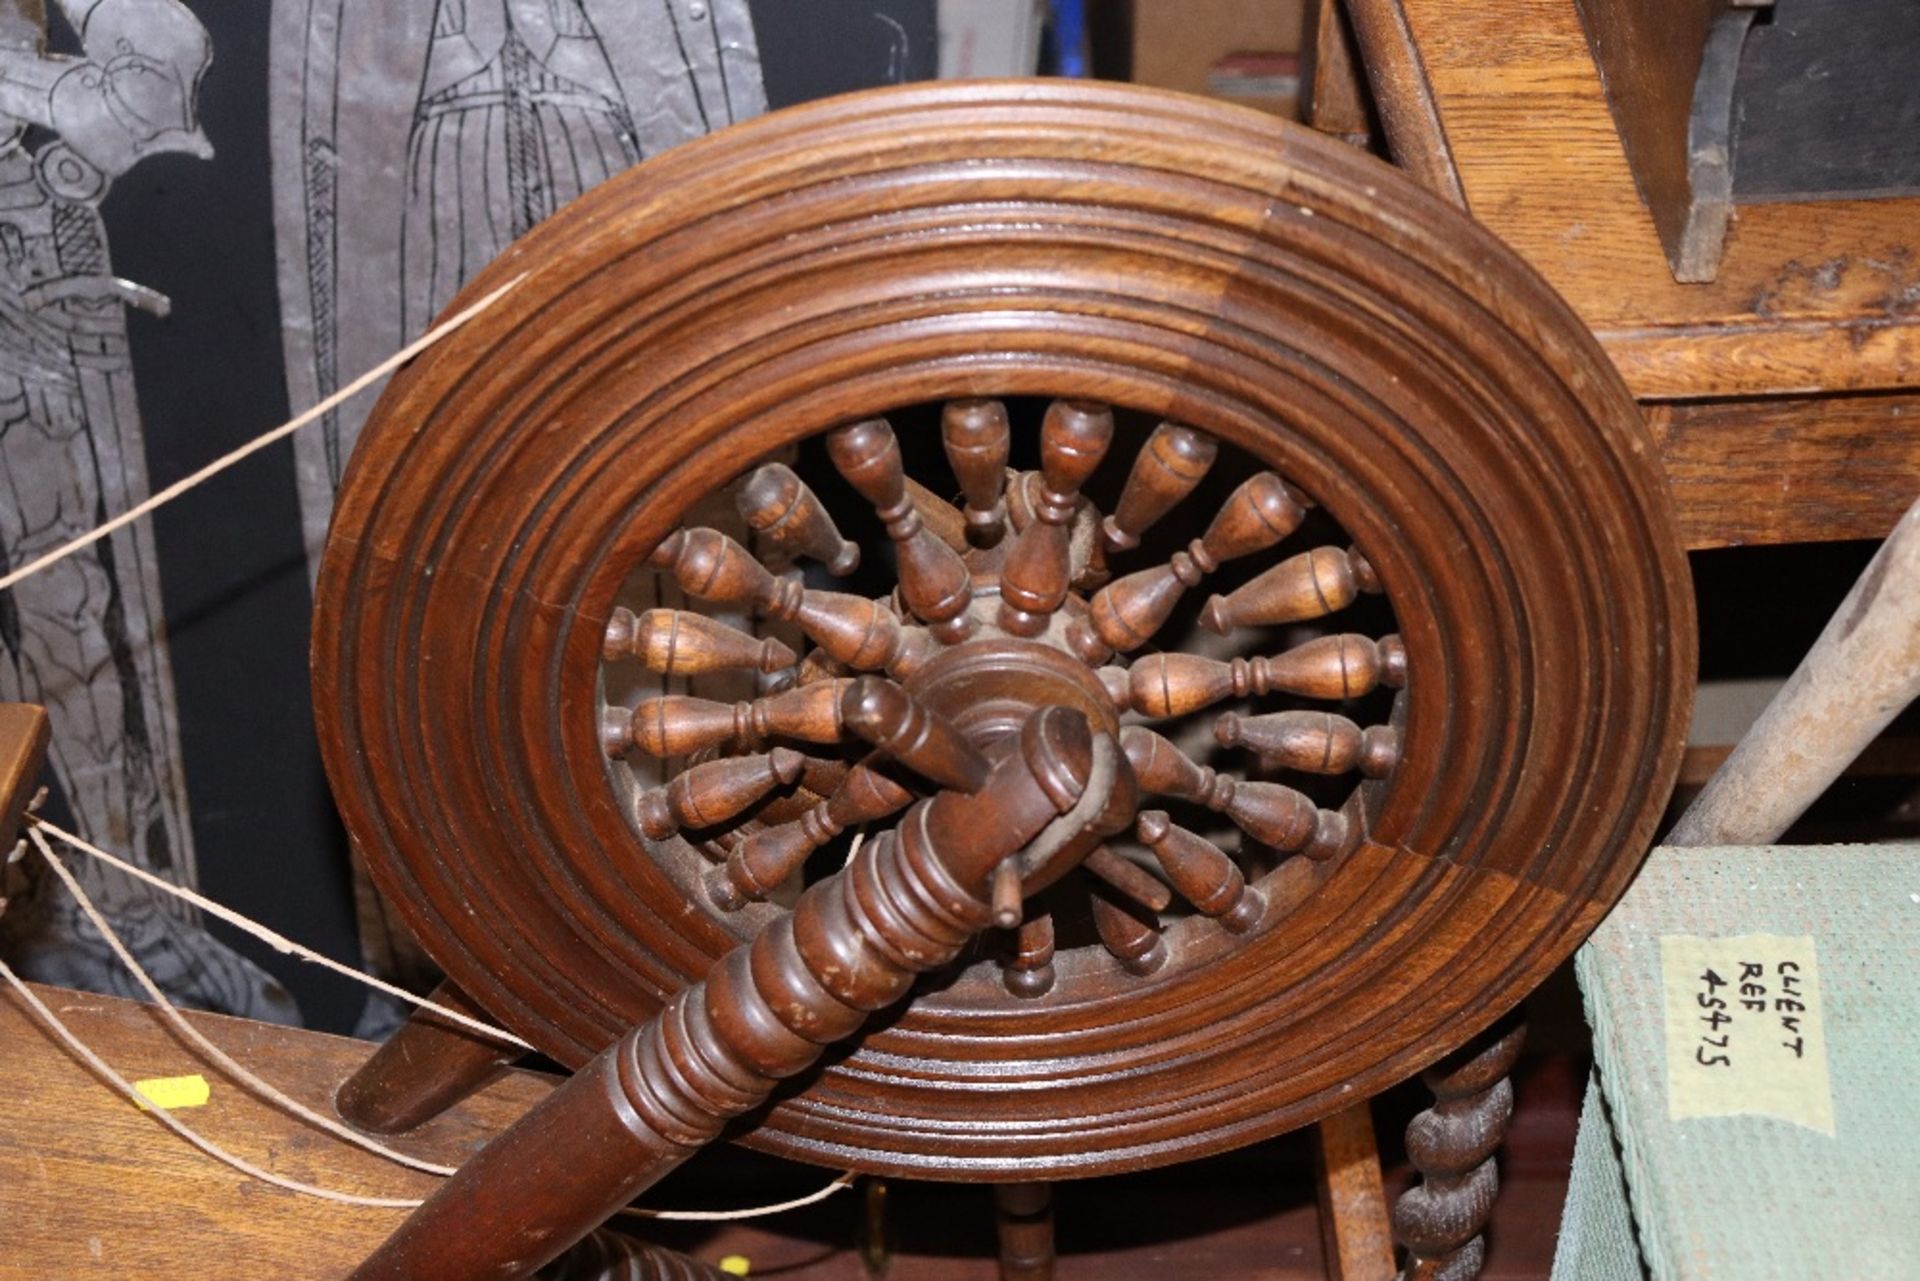 A spinning wheel - Image 2 of 3